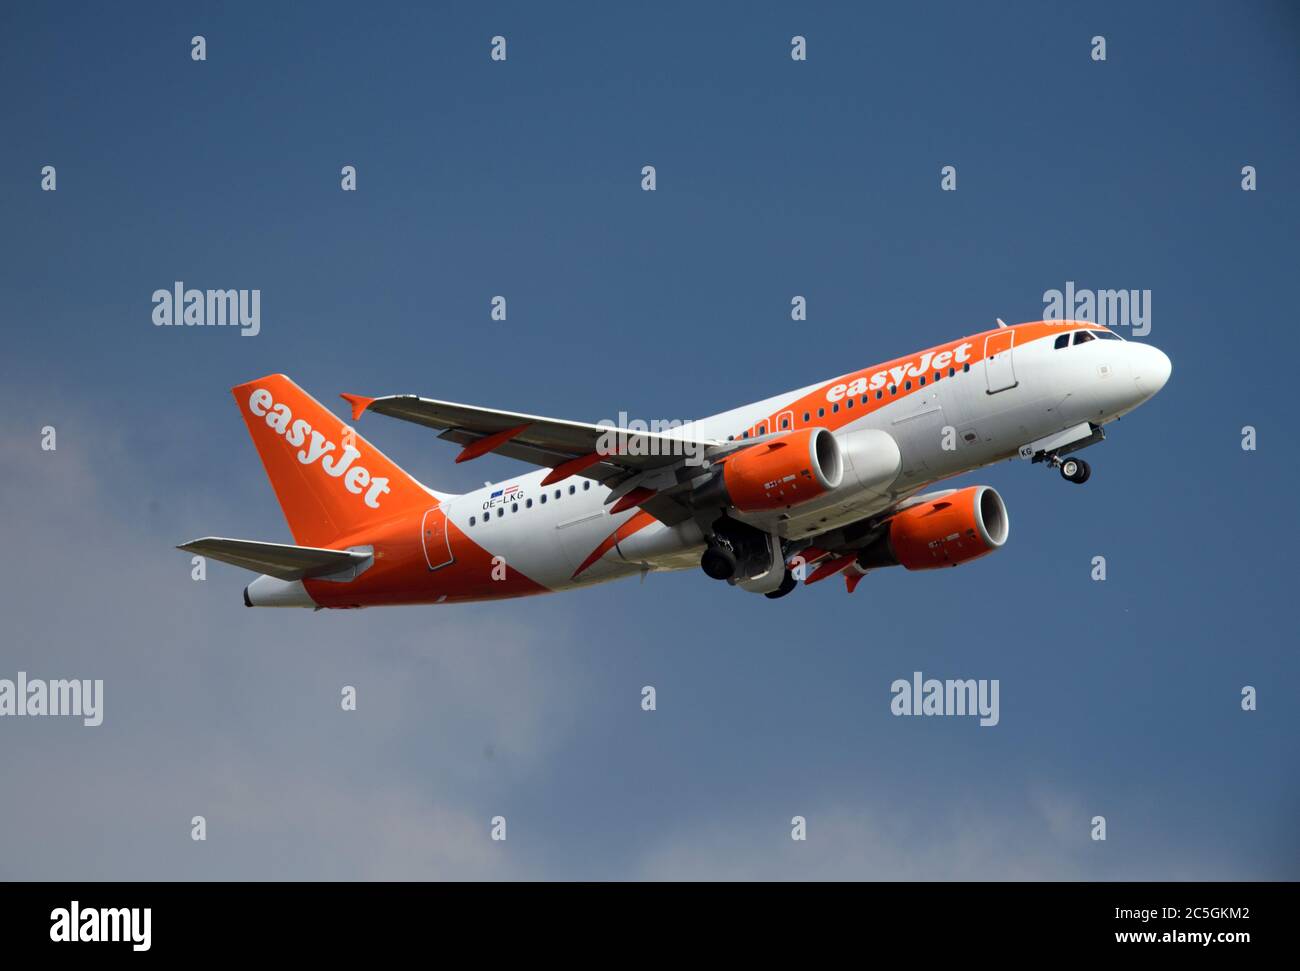 02 July 2020, Brandenburg, Schönefeld: An Airbus A320-200 Sharklets of the airline easyJet Europe will take off from the airport runway for its flight to Pristina. Photo: Soeren Stache/dpa-Zentralbild/ZB Stock Photo